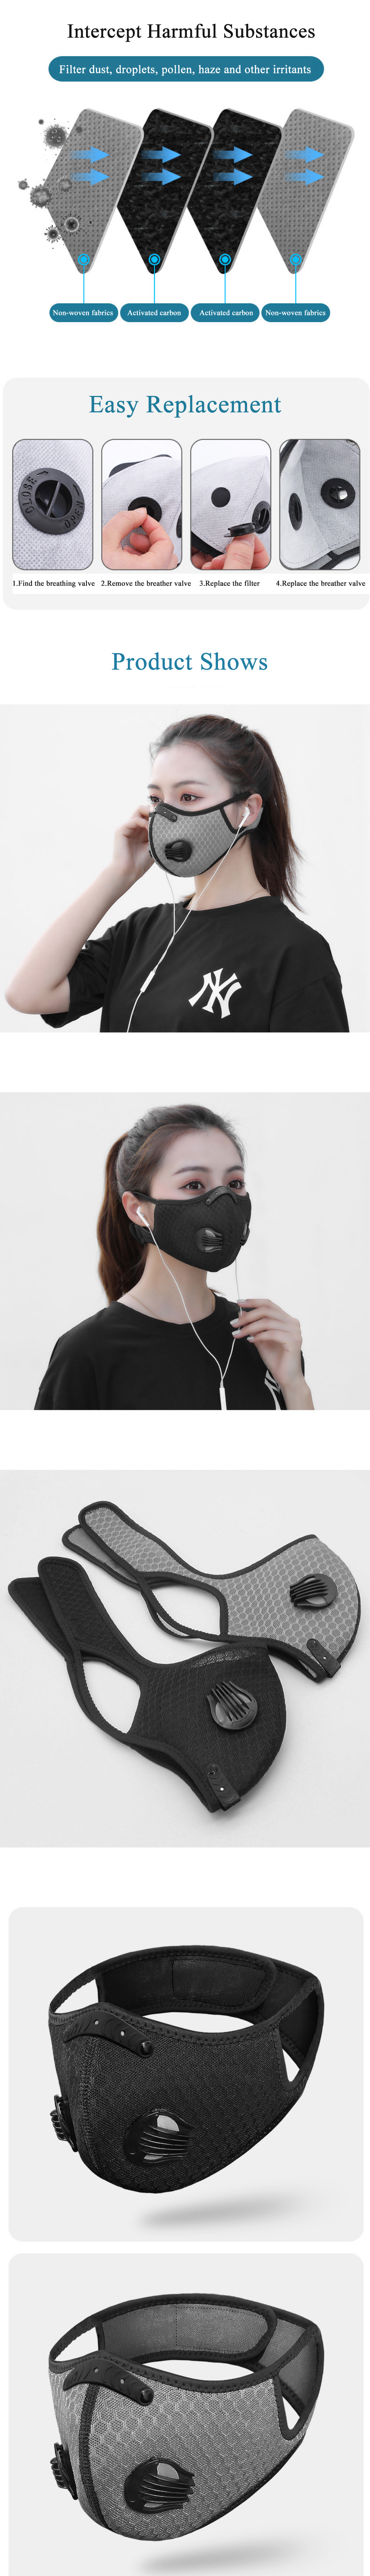 Aolikes-4-Filters-Breathable-Dustproof-Face-Mask-With-Valves-Anit-fog-Bicycle-Respirator-Outdoor-Spo-1662516-2